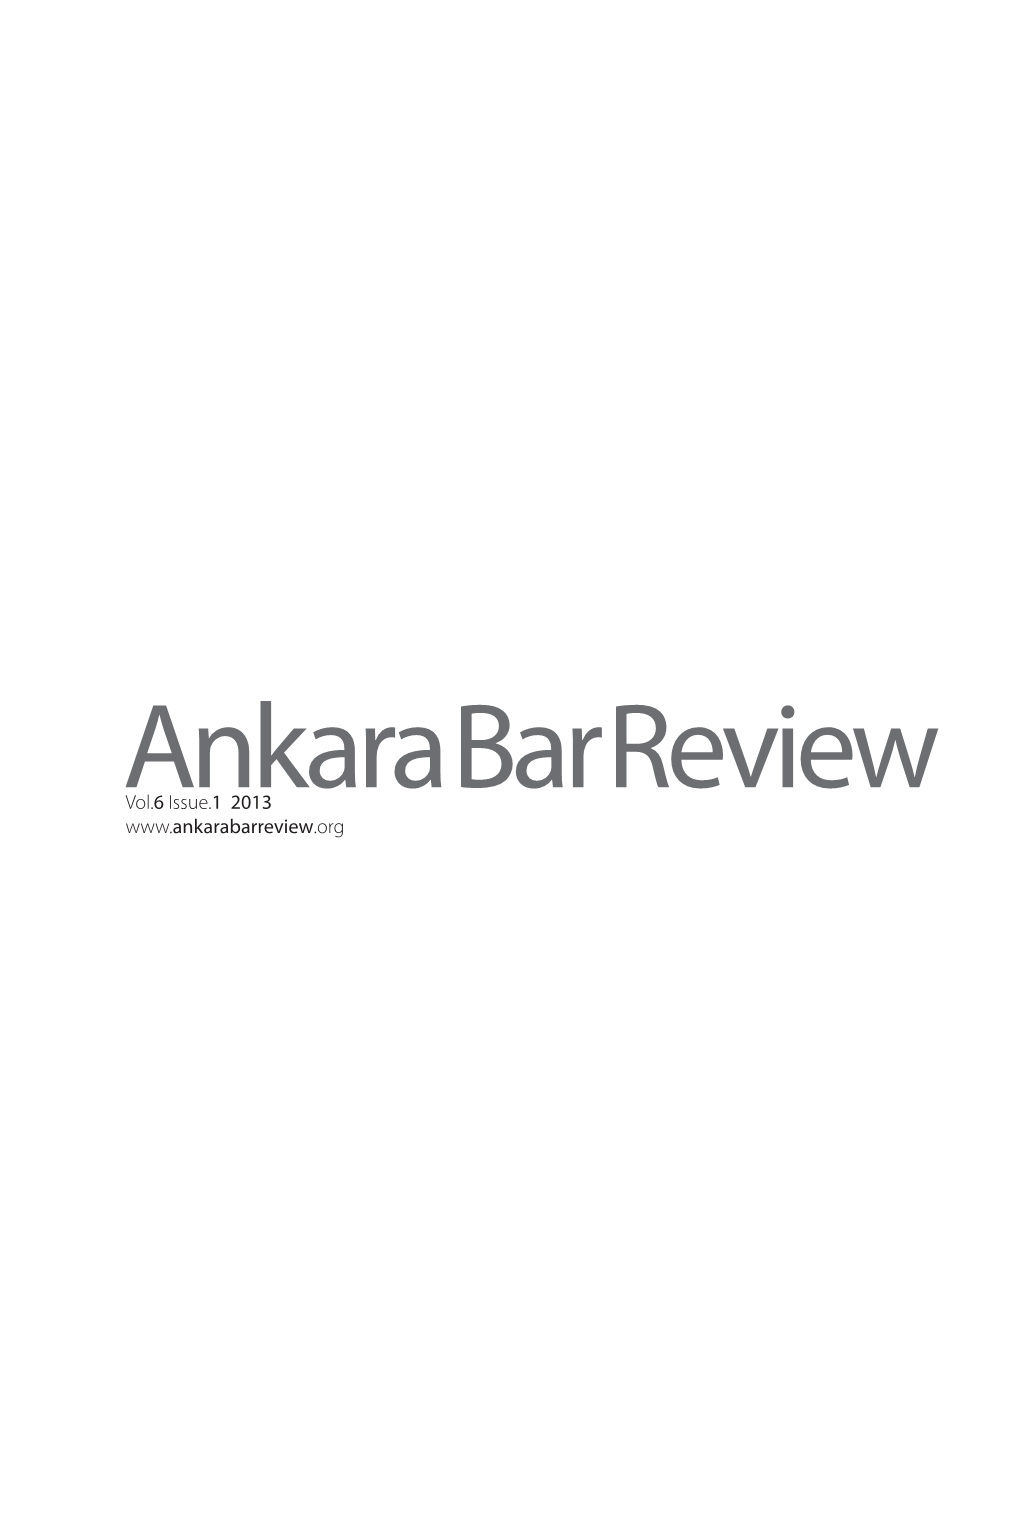 Ankara Bar Review Is a Peer Reviewed and Scientific Law Journal Which Is Indexed at the TÜBİTAK–ULAKBİM Database